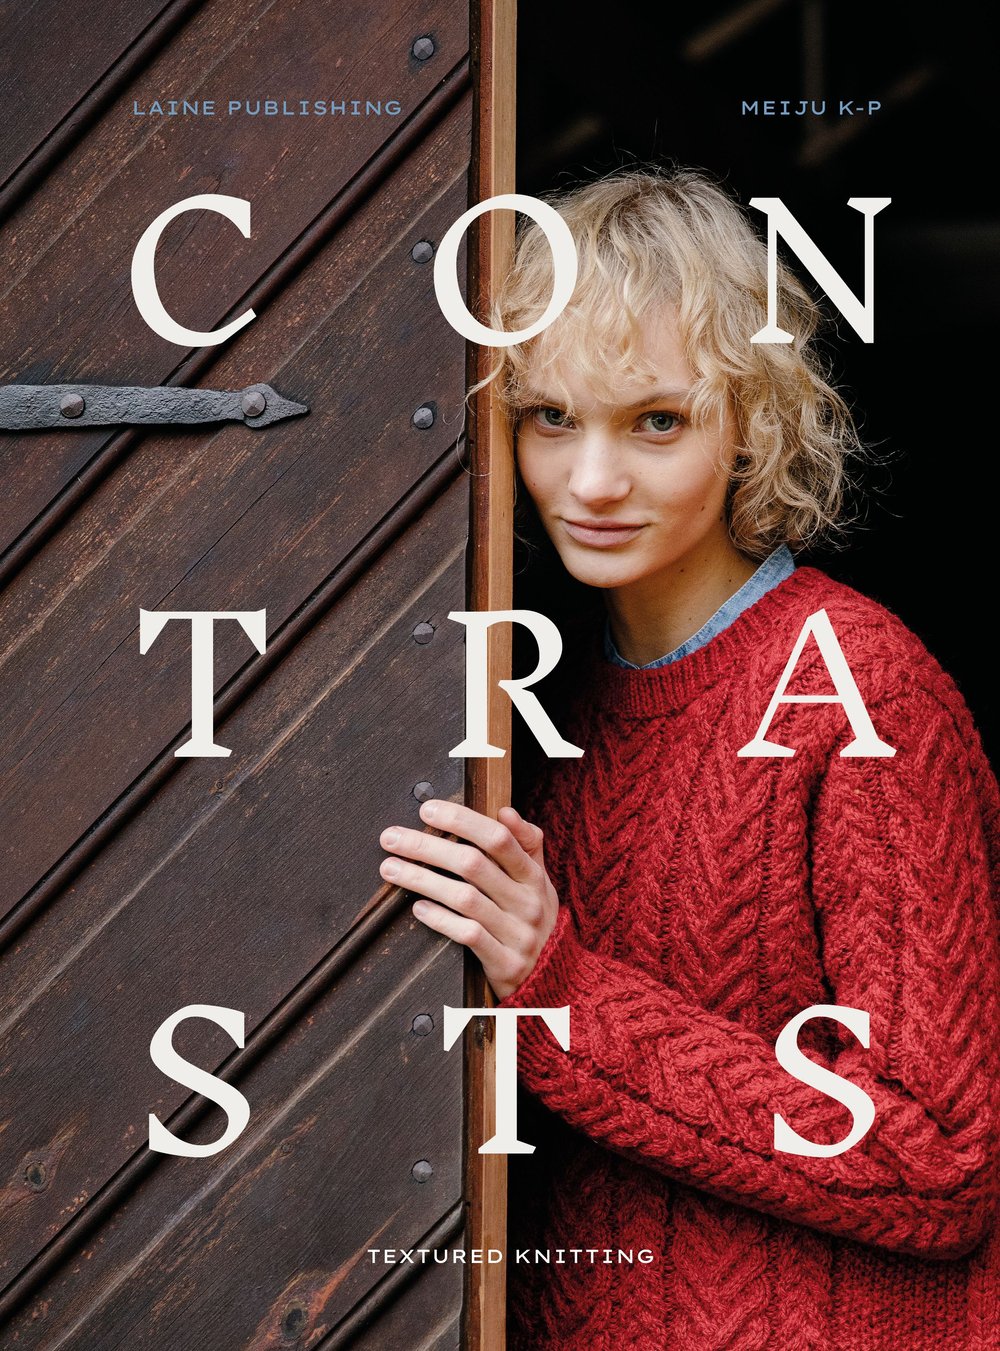 Contrasts - Textured Knitting